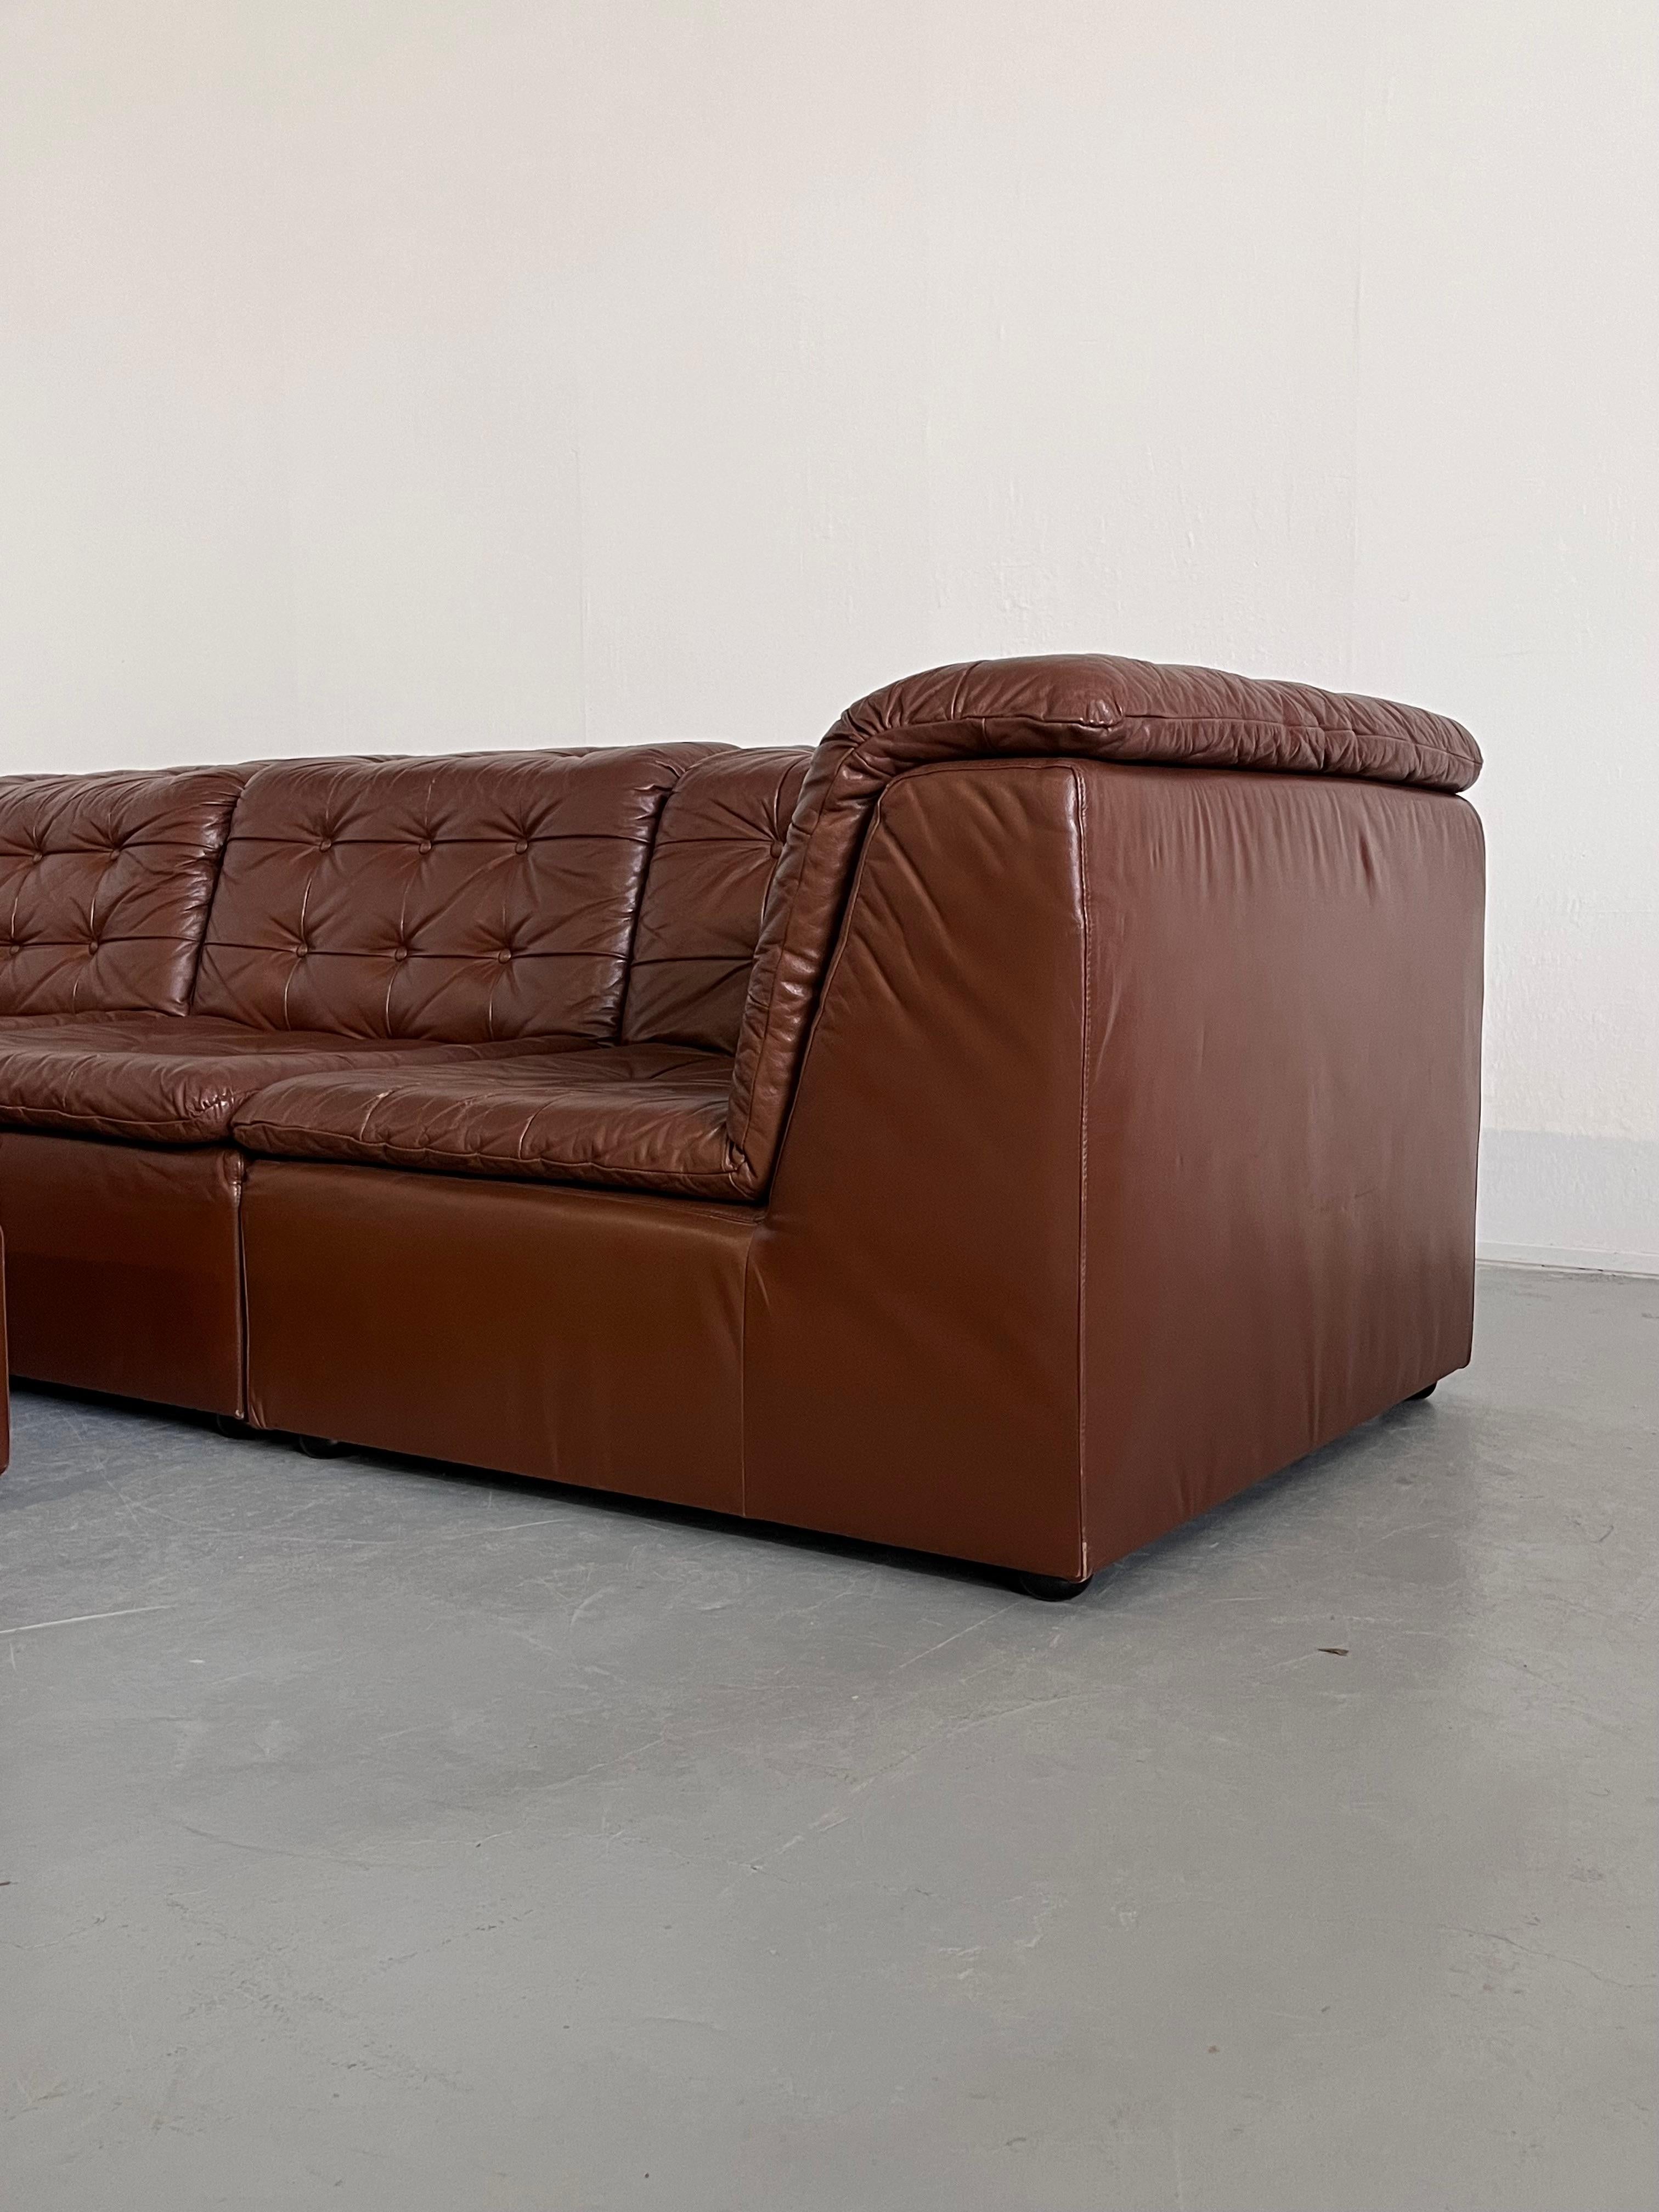 Vintage Patchwork Cognac Leather Six-Part Modular Sofa by Laauser, 1970s Germany For Sale 8